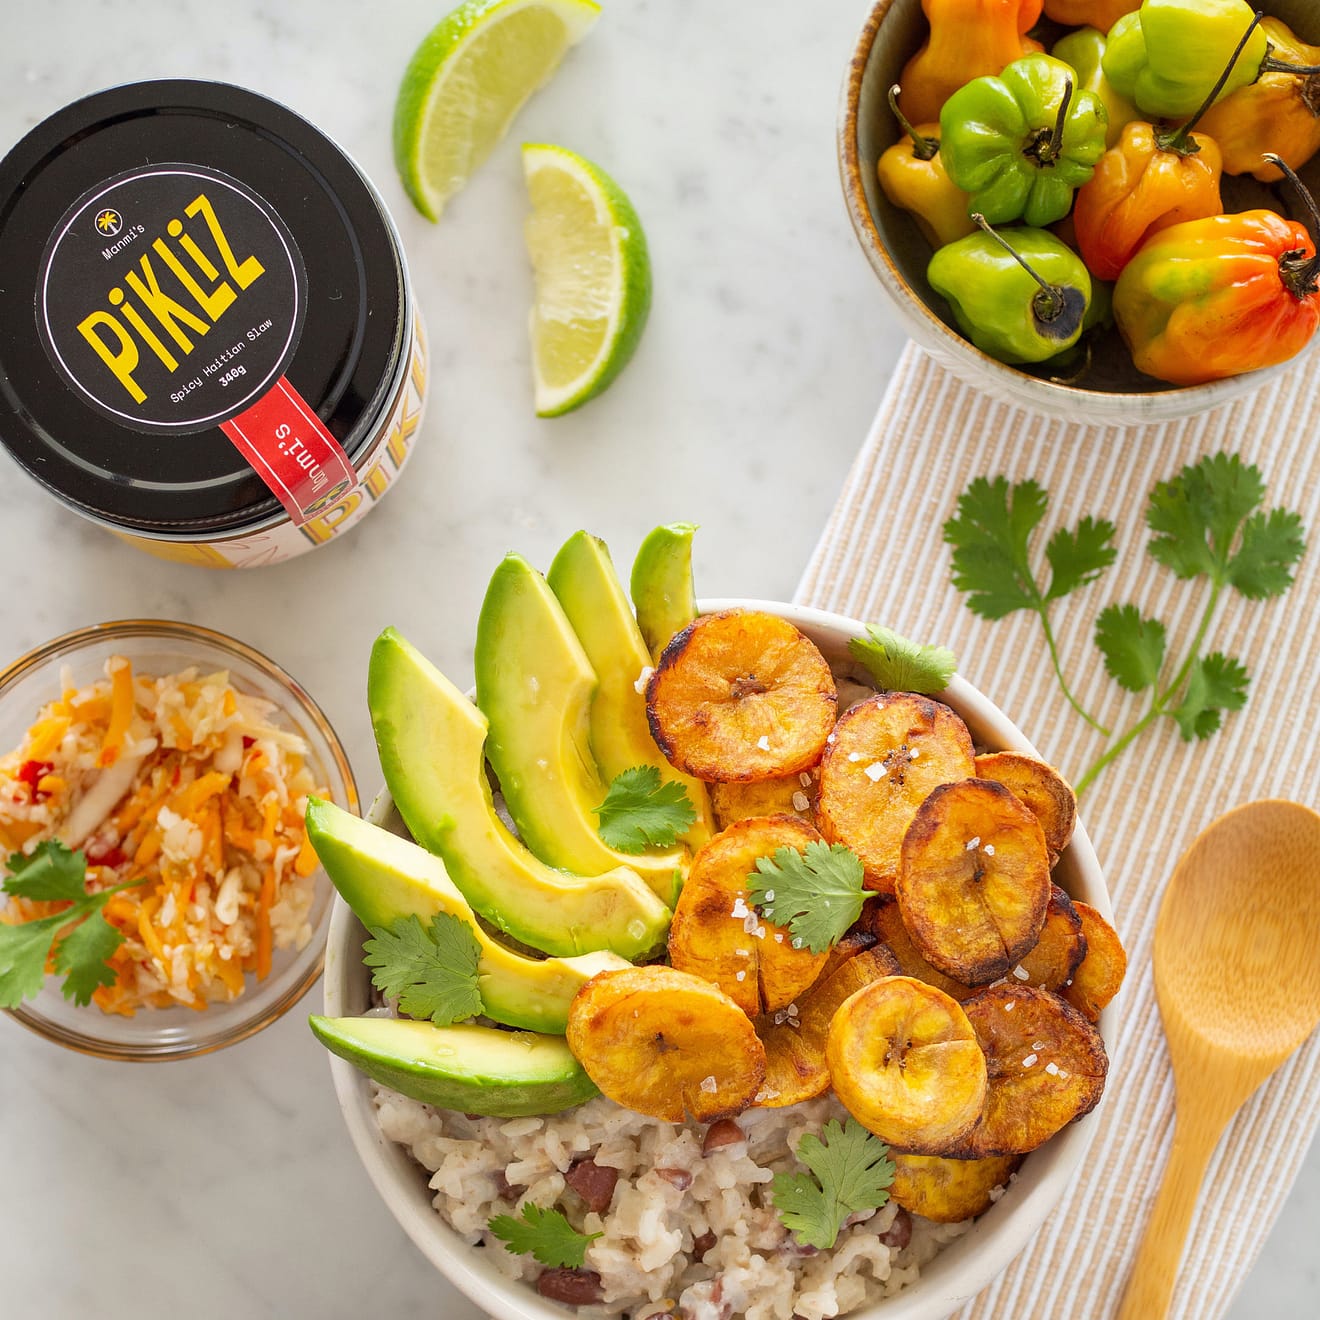 Avocado slices and fried plantains atop a bowl of rice and beans. A jar of Pikliz is also seen on the table